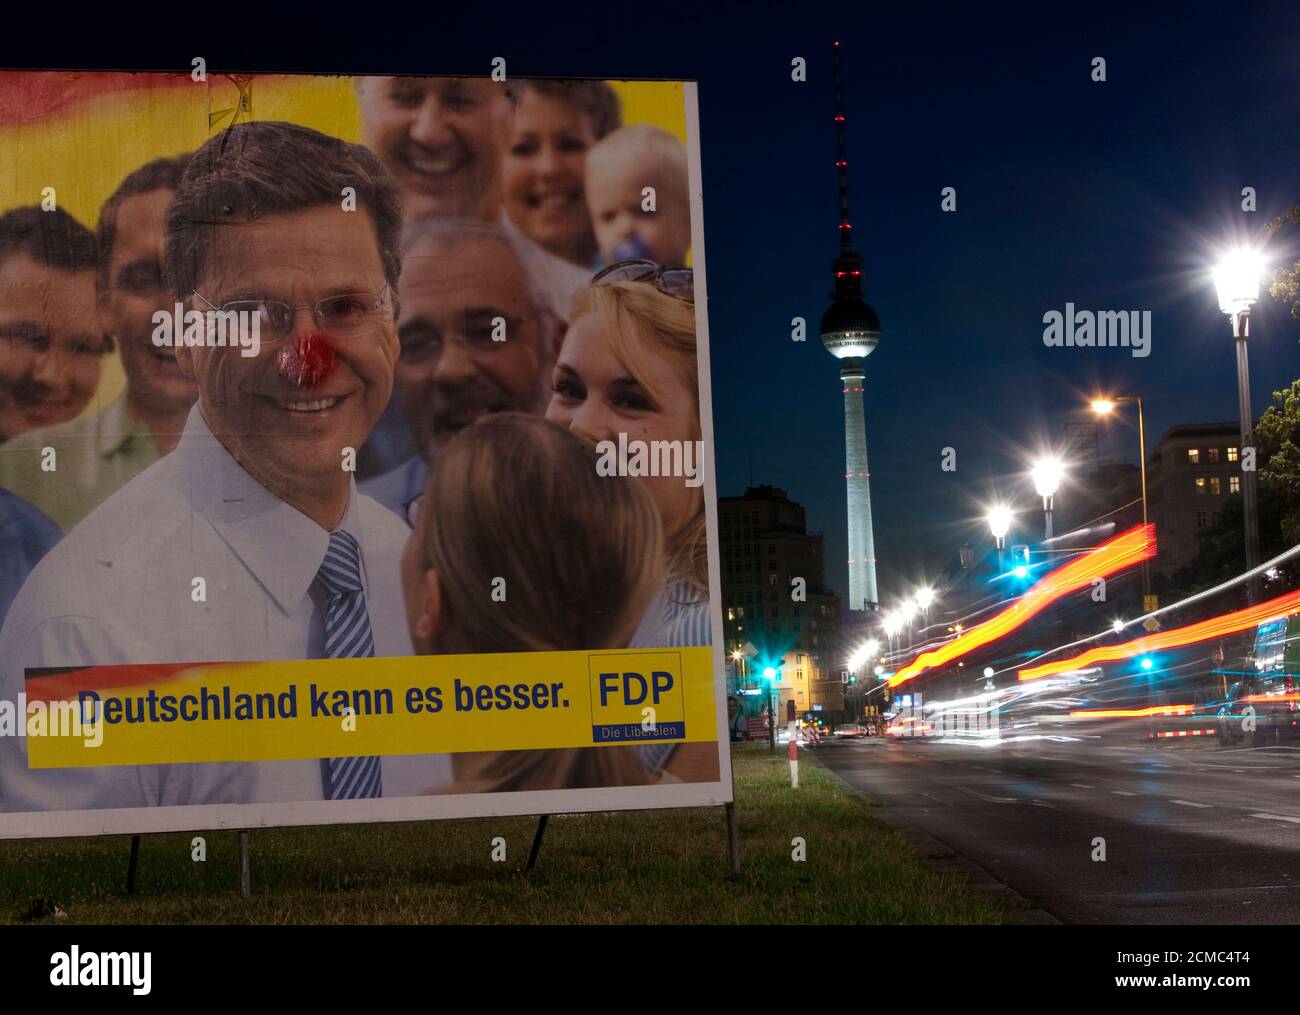 An election poster of the liberal FDP party shows its party leader Guido Westerwelle near the Fernsehturm television tower in Berlin  August 31, 2009.   REUTERS/Thomas Peter  (GERMANY POLITICS ELECTIONS) Foto Stock